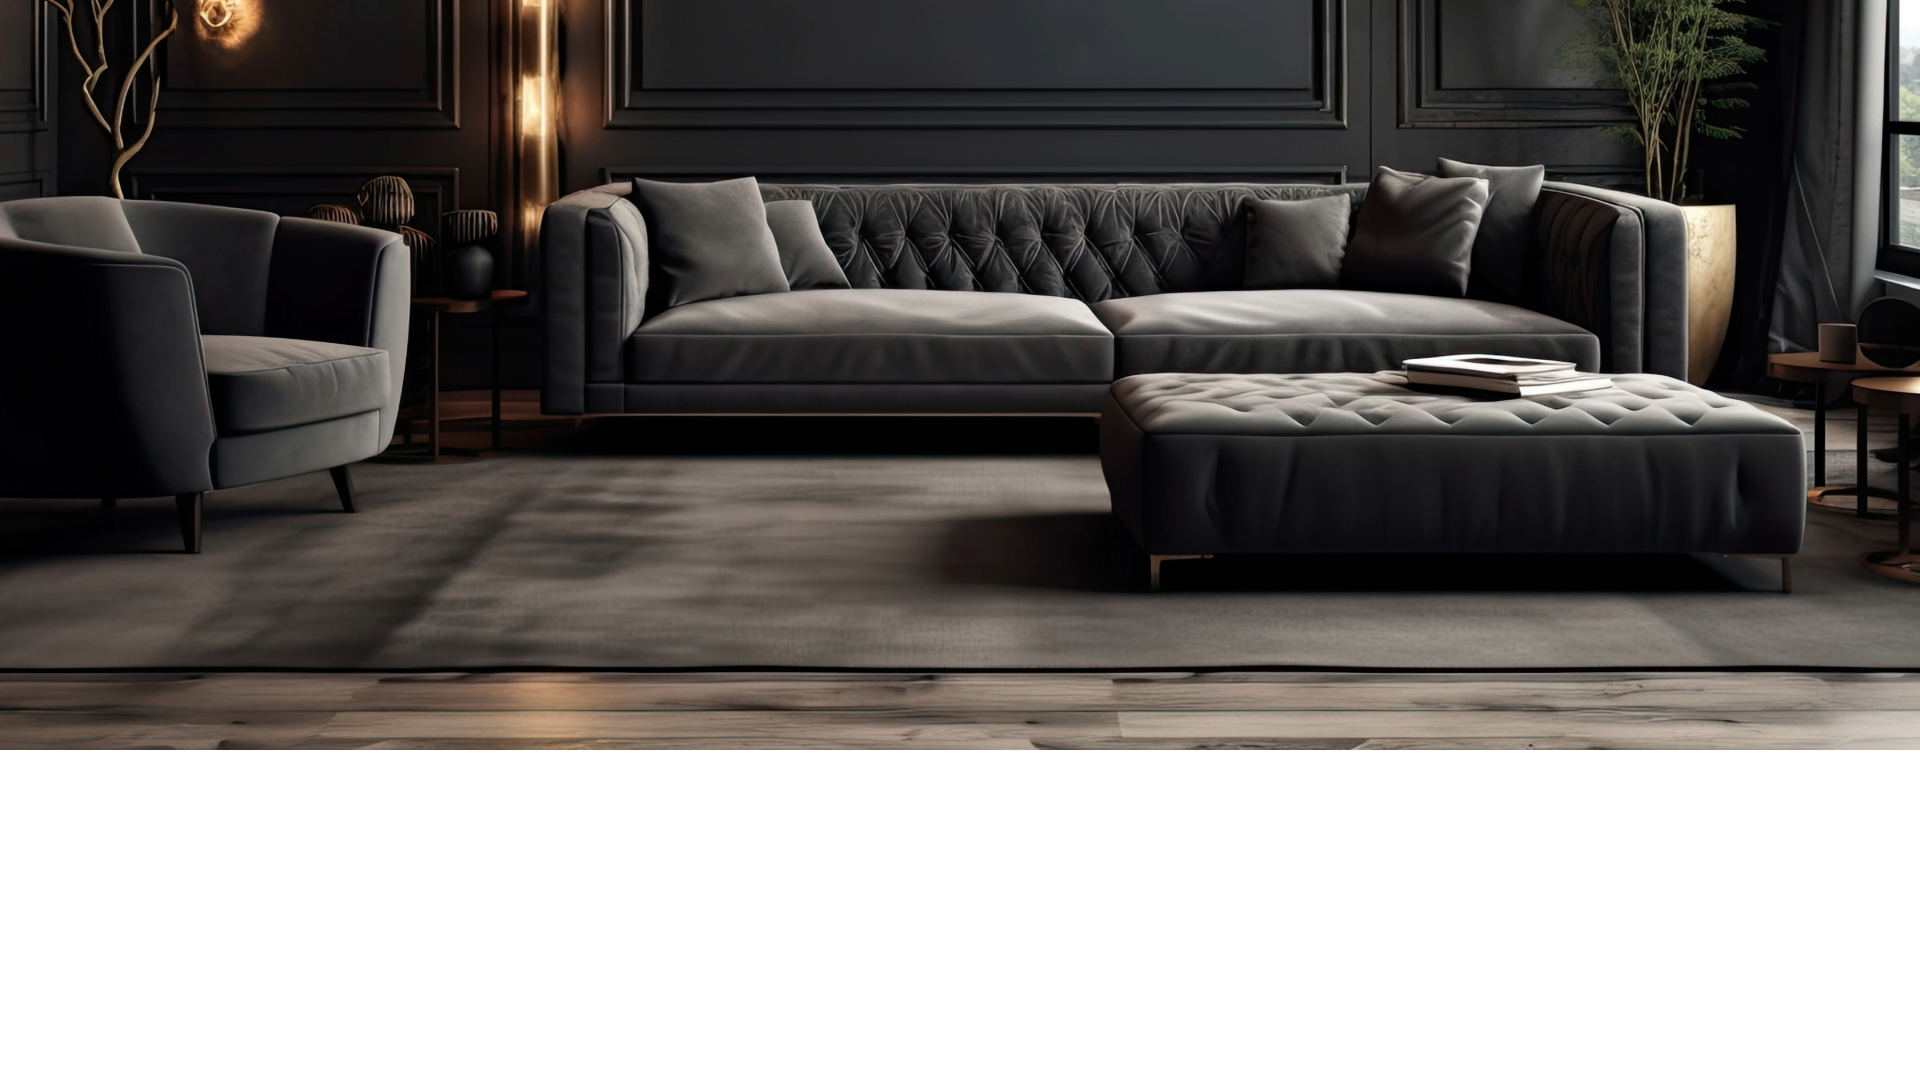 My Account image, louis and henry - an image of a lounge area with grey sofas. luxury style